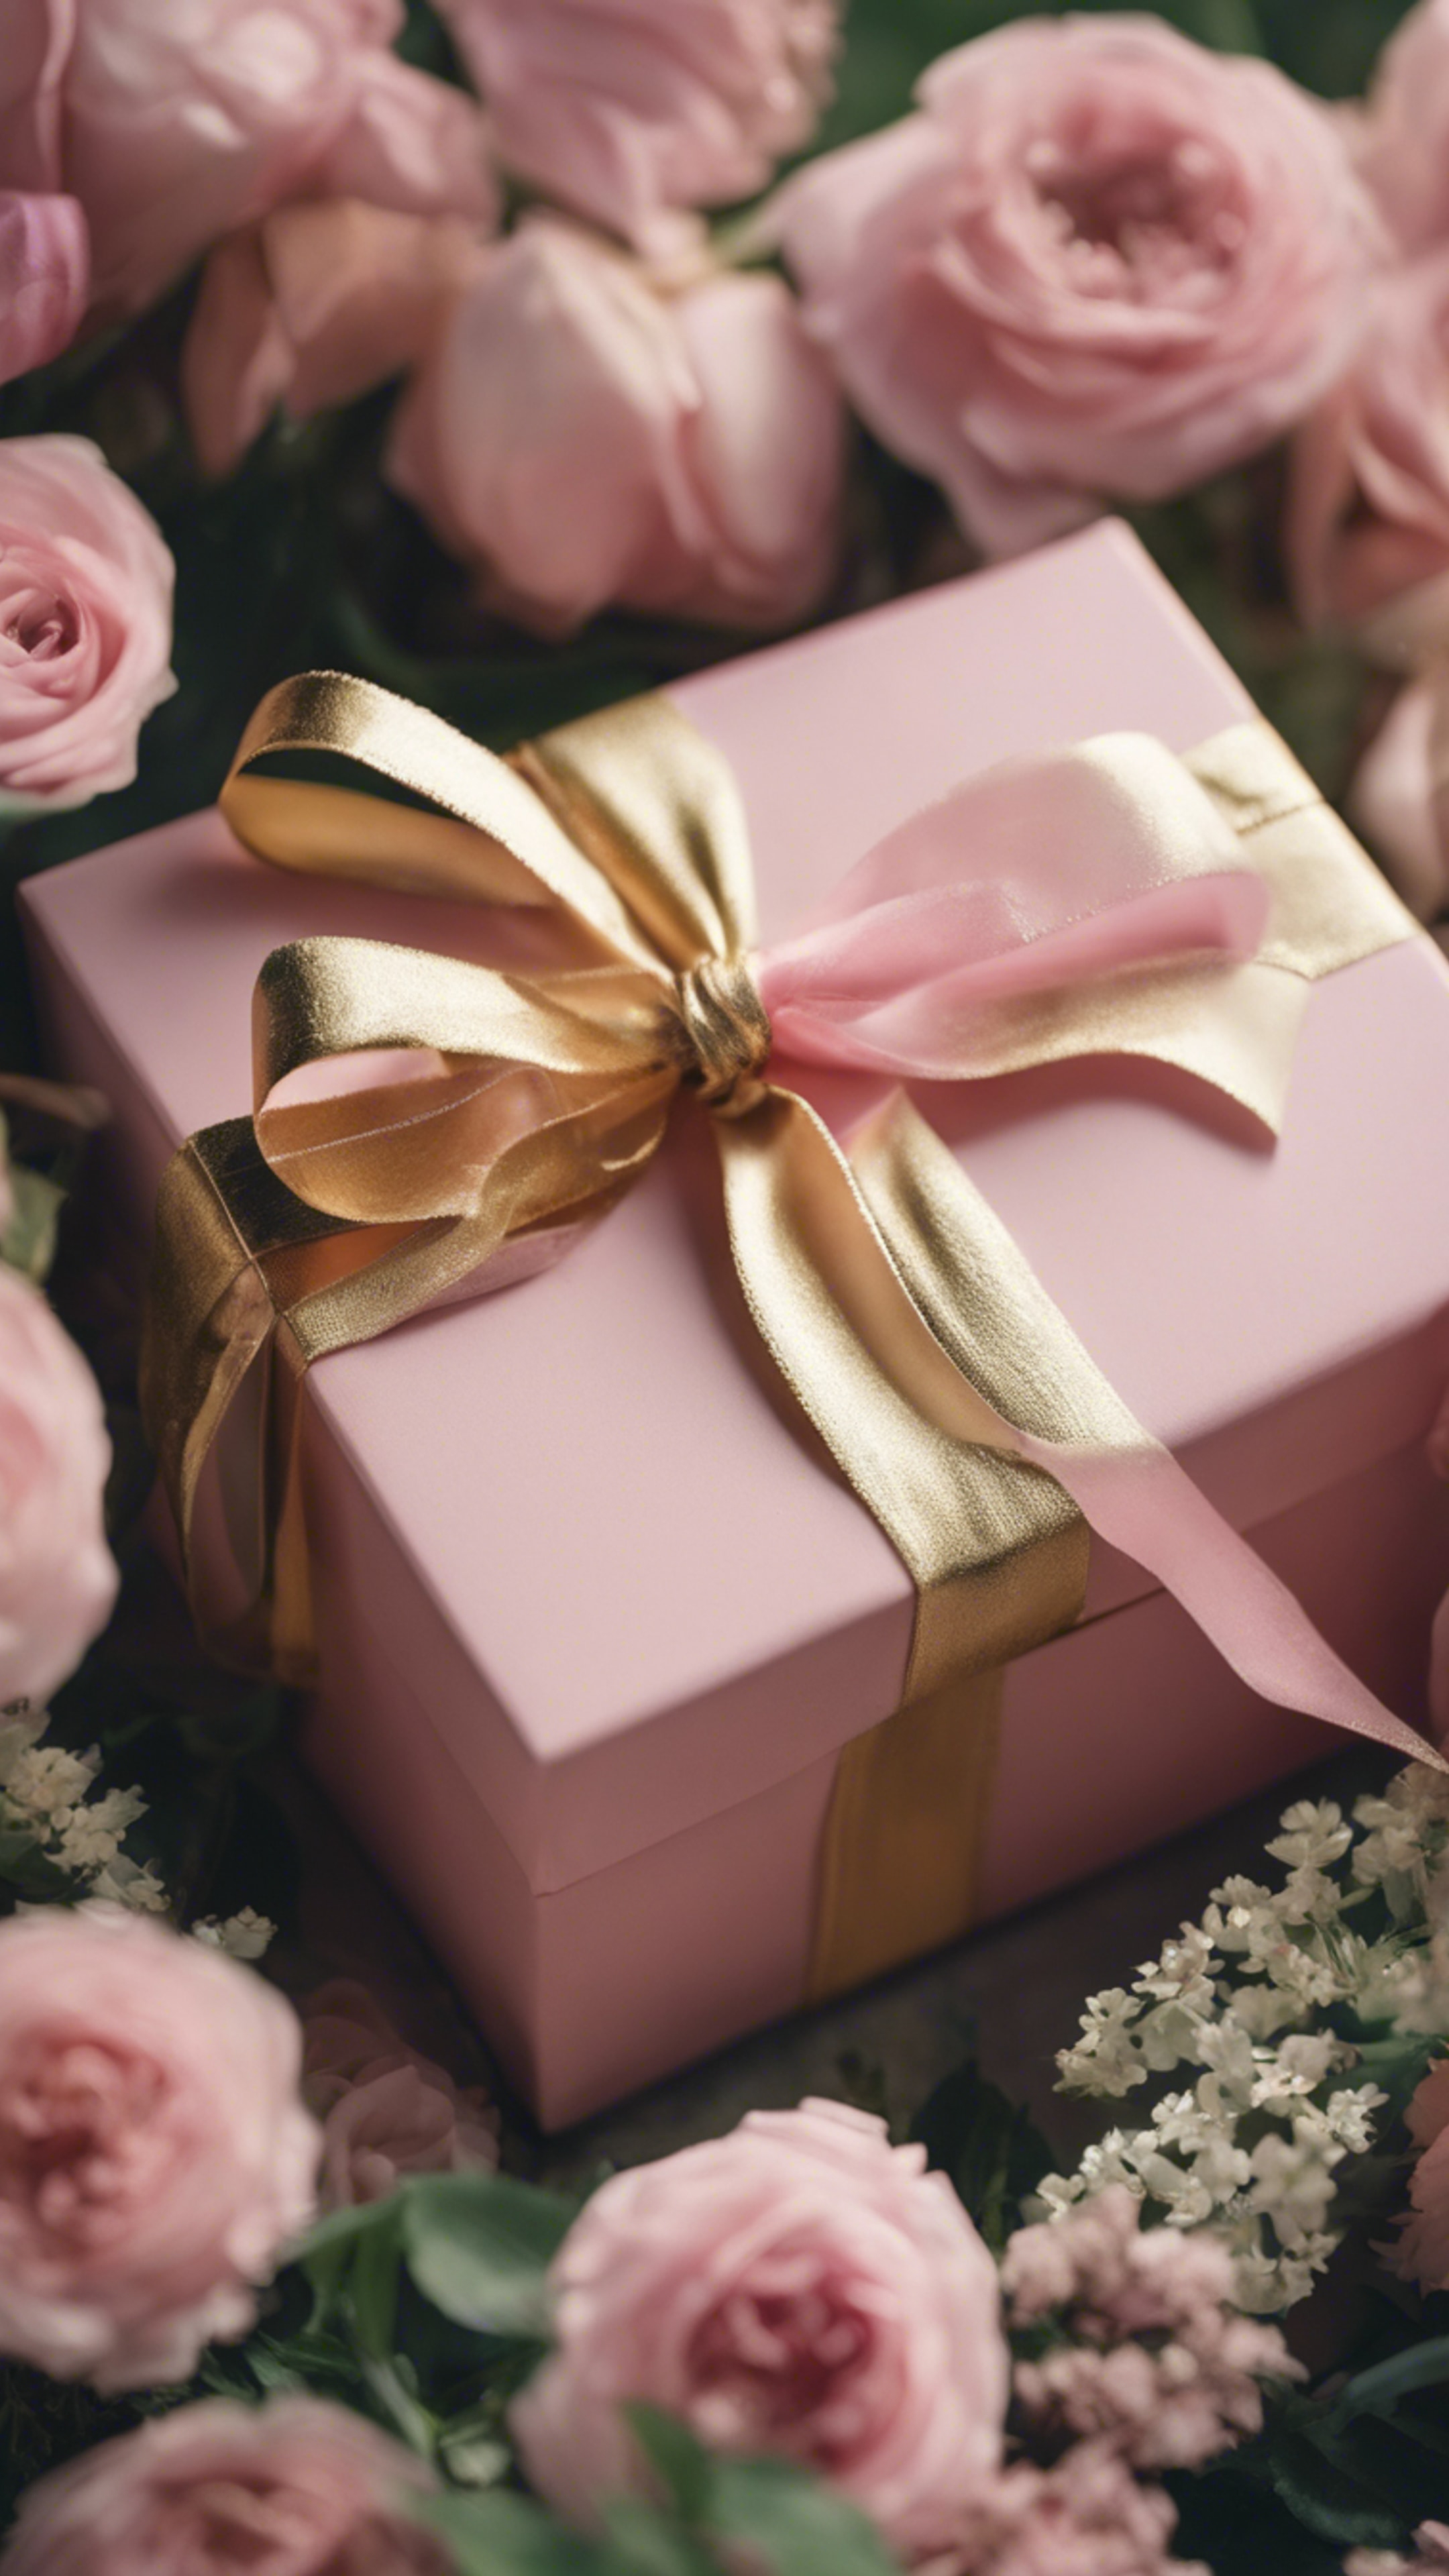 A gold-ribboned pink gift box nestled amongst flowers and greenery. Tapet[057f26c1d4b14d2a96a8]